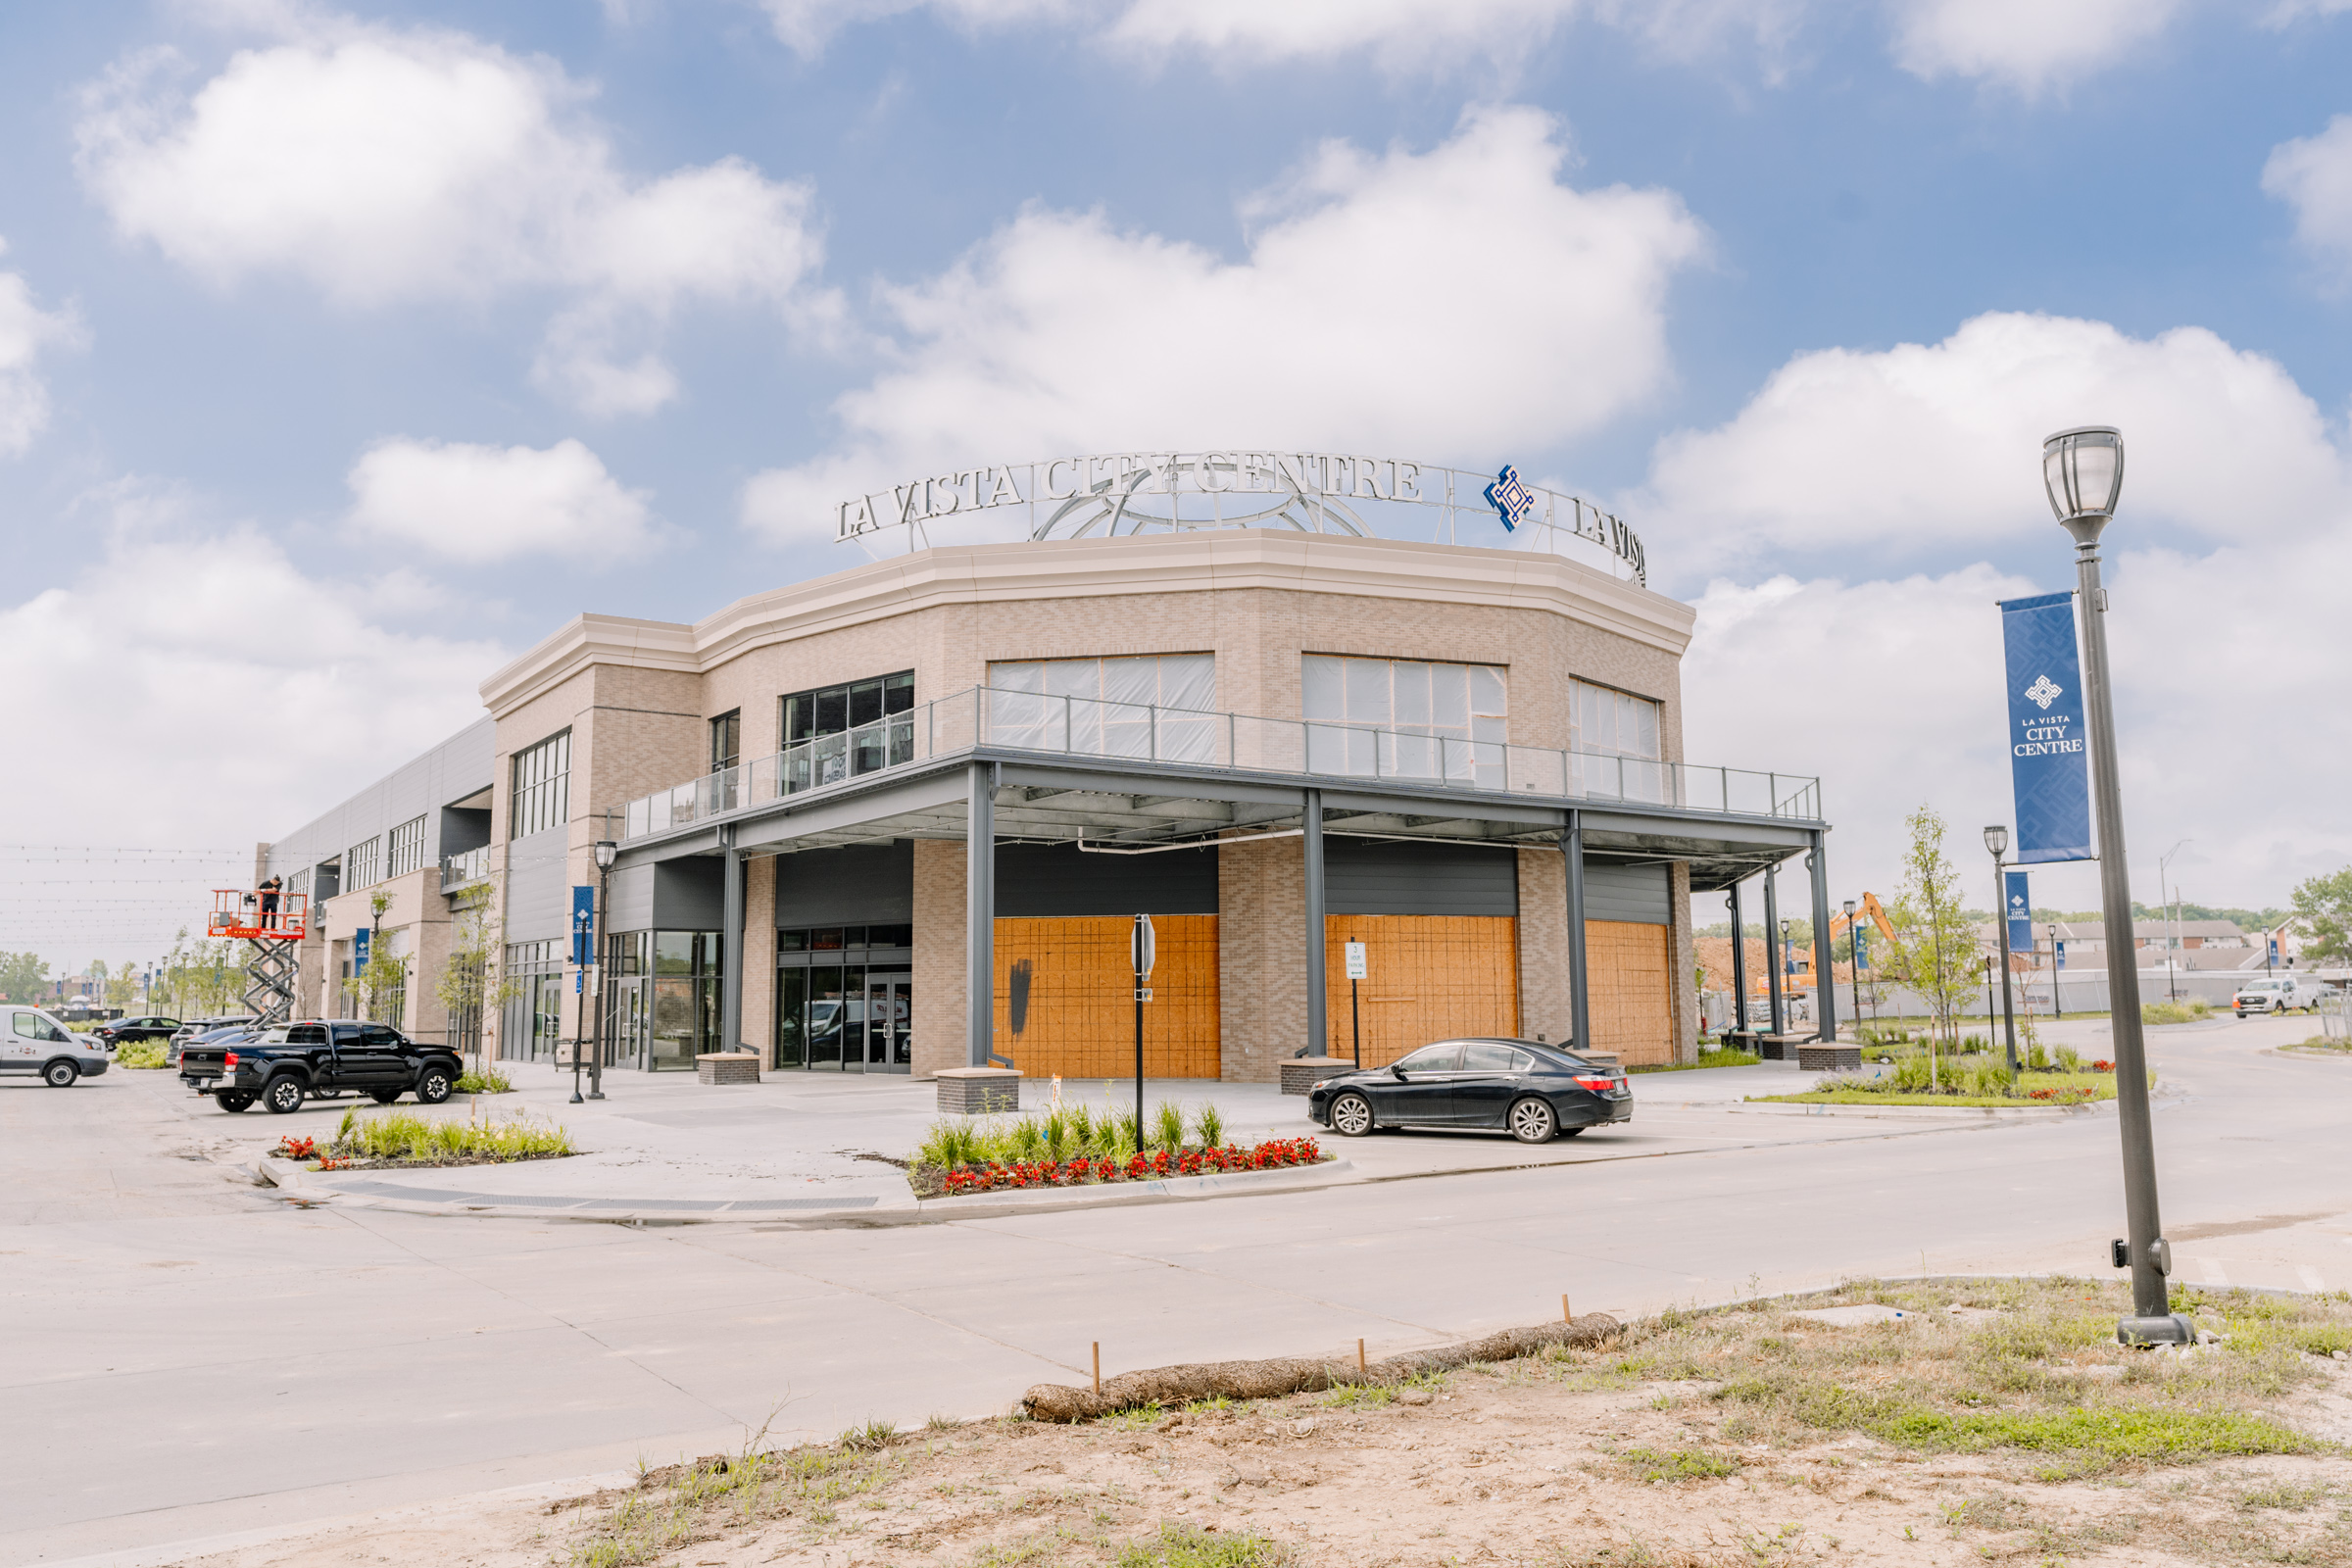 A variety of retail spaces and businesses can inhabit this landmark building at LVCC.